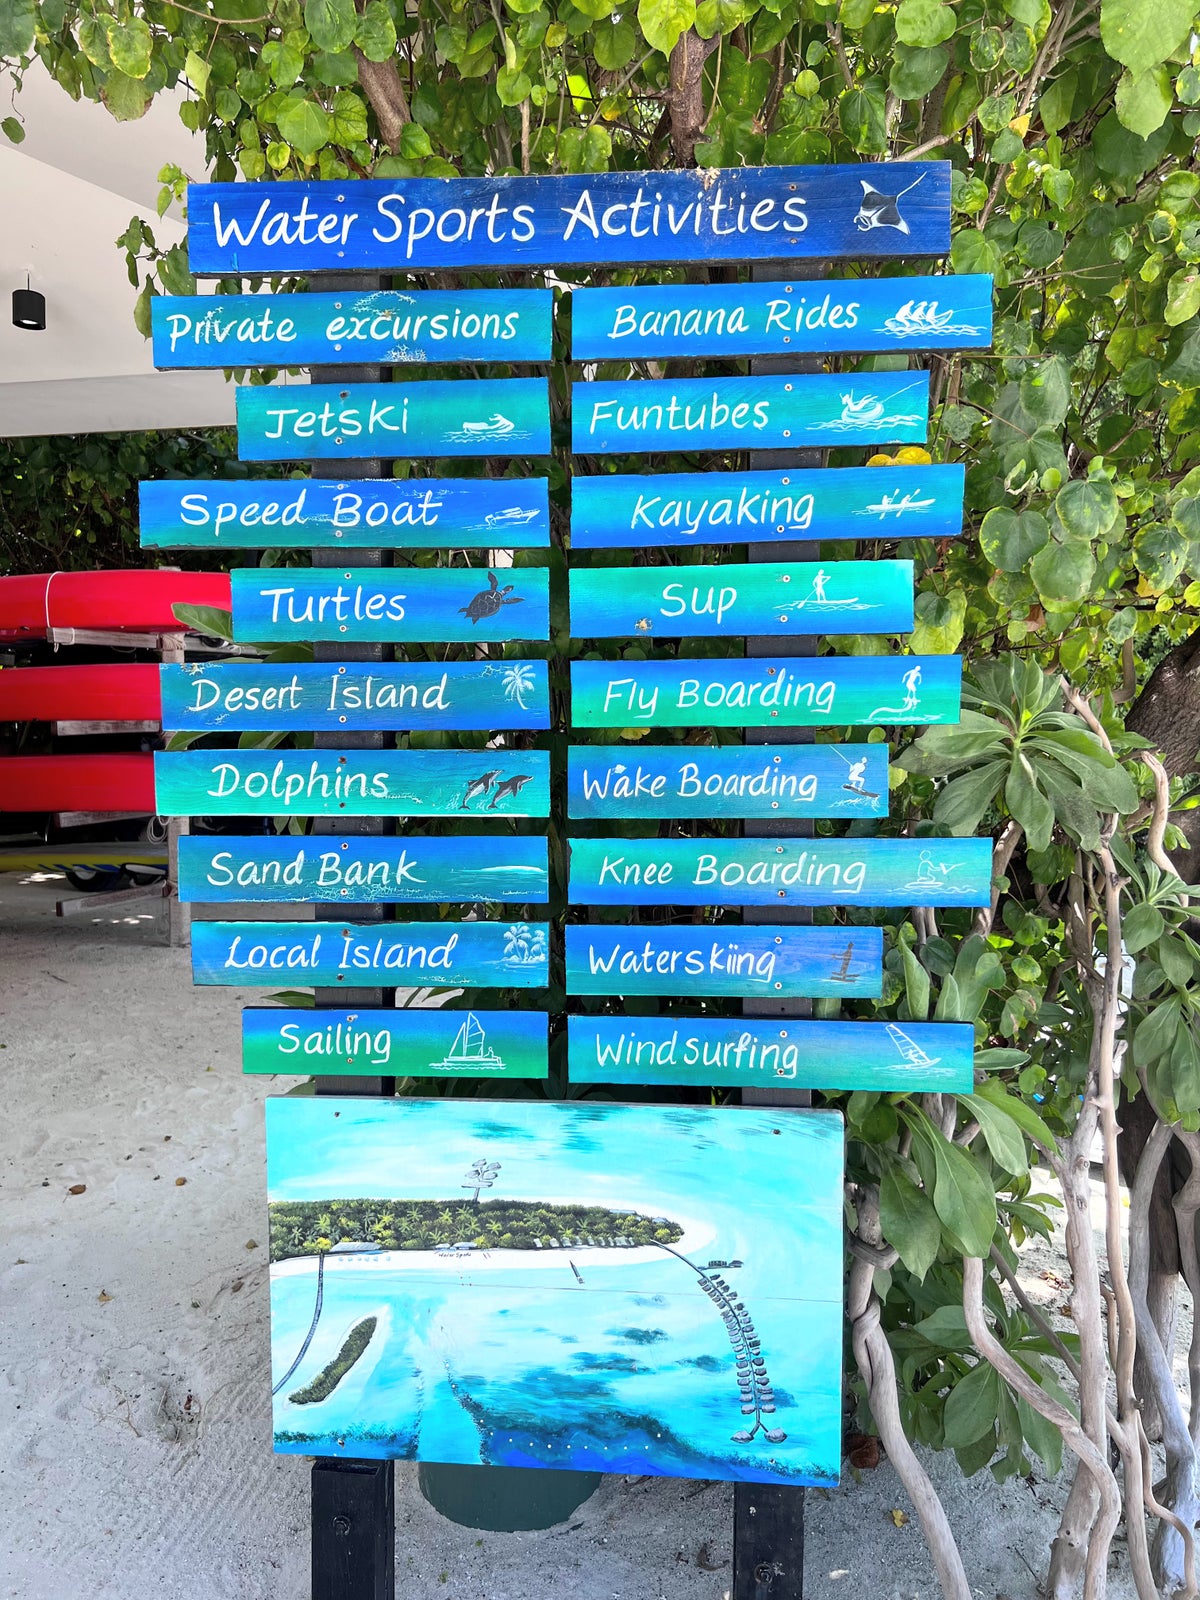 Water sports activities sign